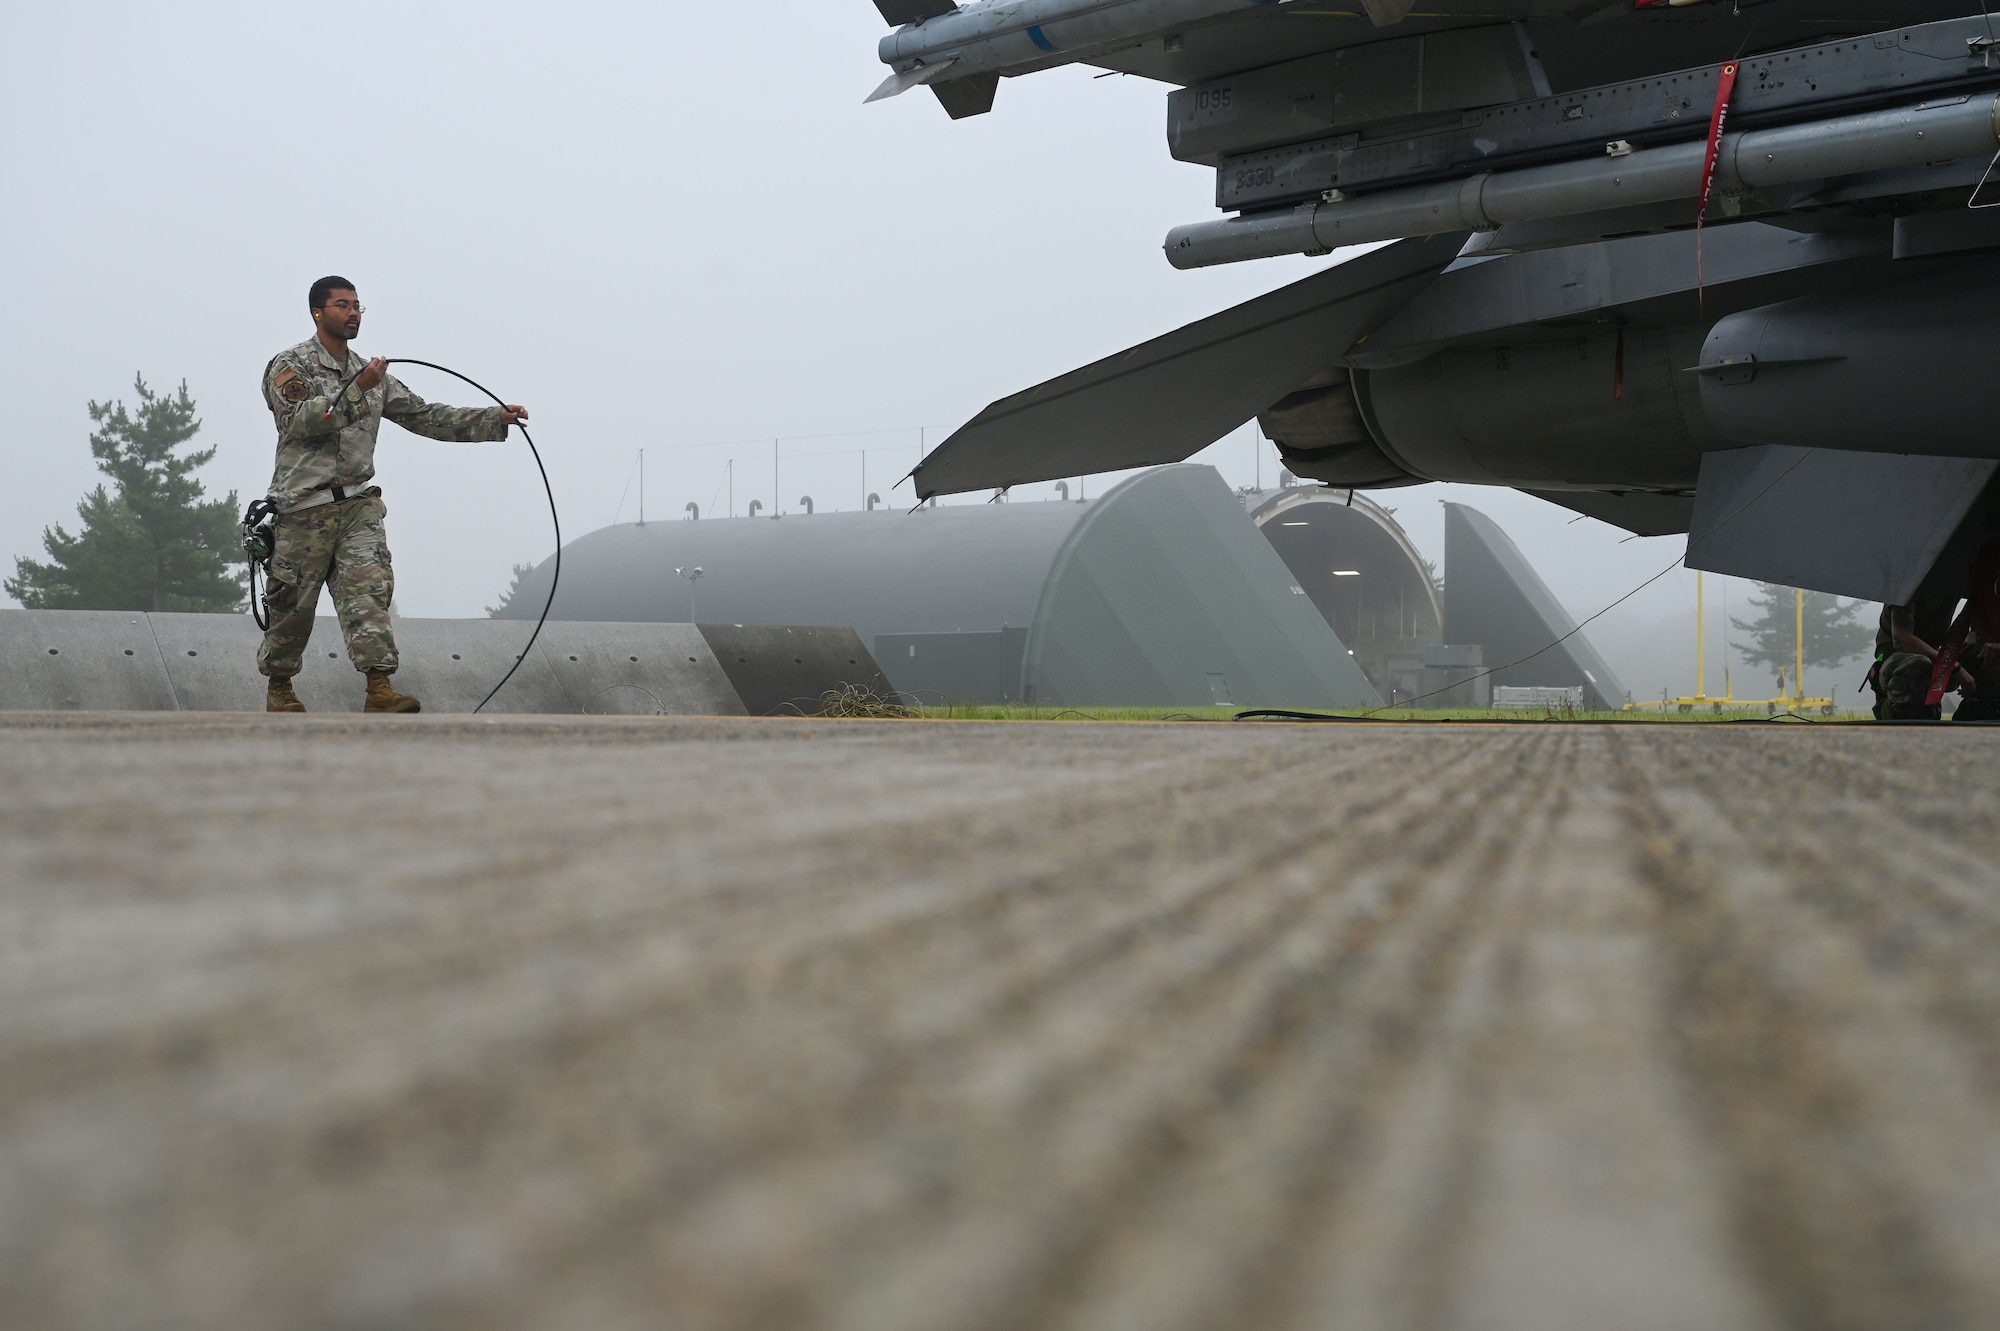 U.S. Air Force Tech. Sgt. Reginald Davis, 87th Electronic Warfare Squadron Combat Shield avionics electronic warfare (EW) technician, pulls out the radar frequency cable to assess the defensive system readiness of a U.S Air Force F-16 Fighting Falcon at Misawa Air Base, Japan, Aug. 8, 2023. Combat Shield ensures U.S. Air Force air assets at Misawa AB have EW combat readiness and are effective to support a free and open Indo-Pacific. (U.S. Air Force photo by Staff Sgt. Ericka A. Woolever)